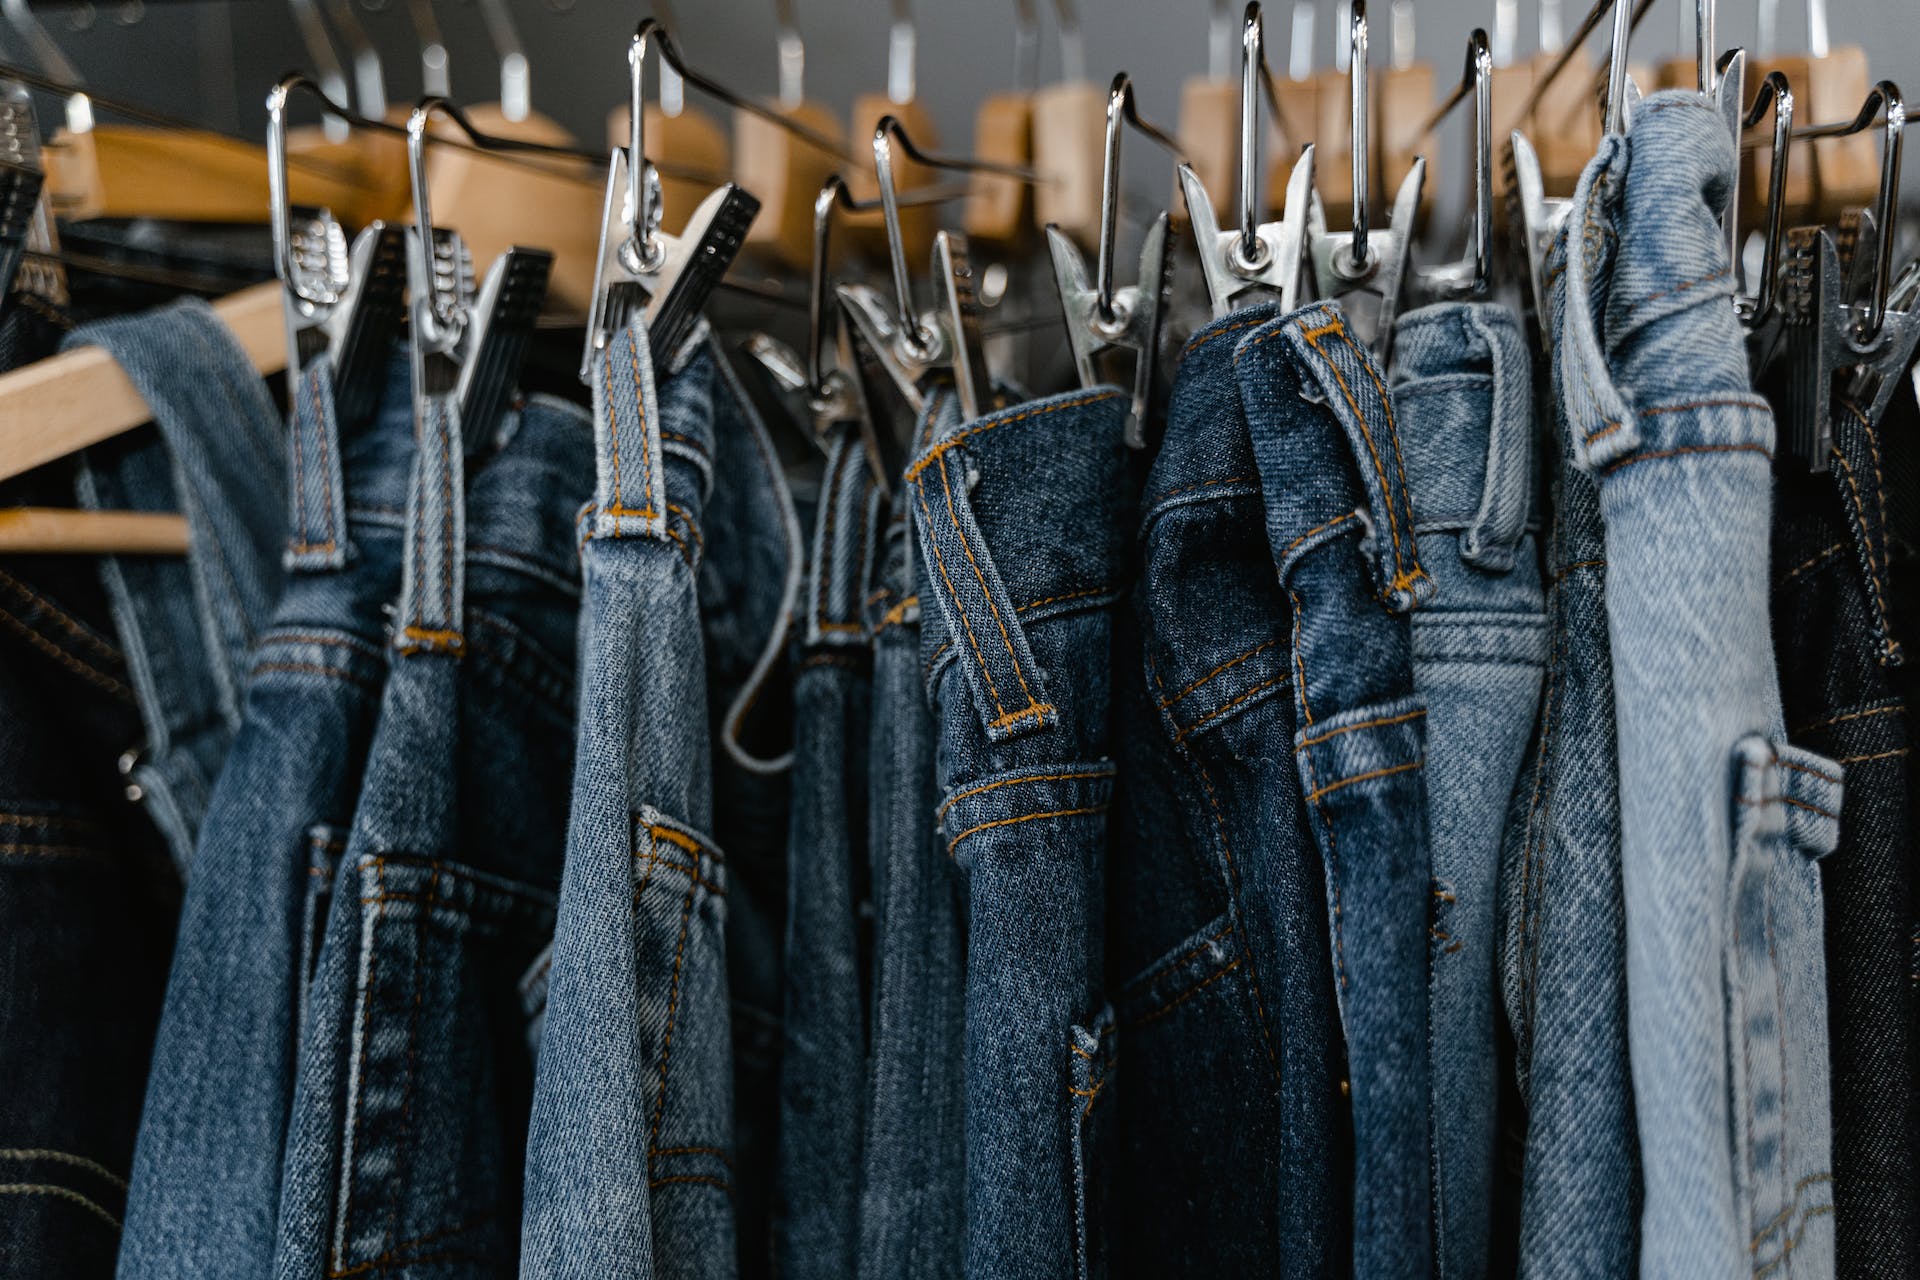 Close up of a rack of denim jeans